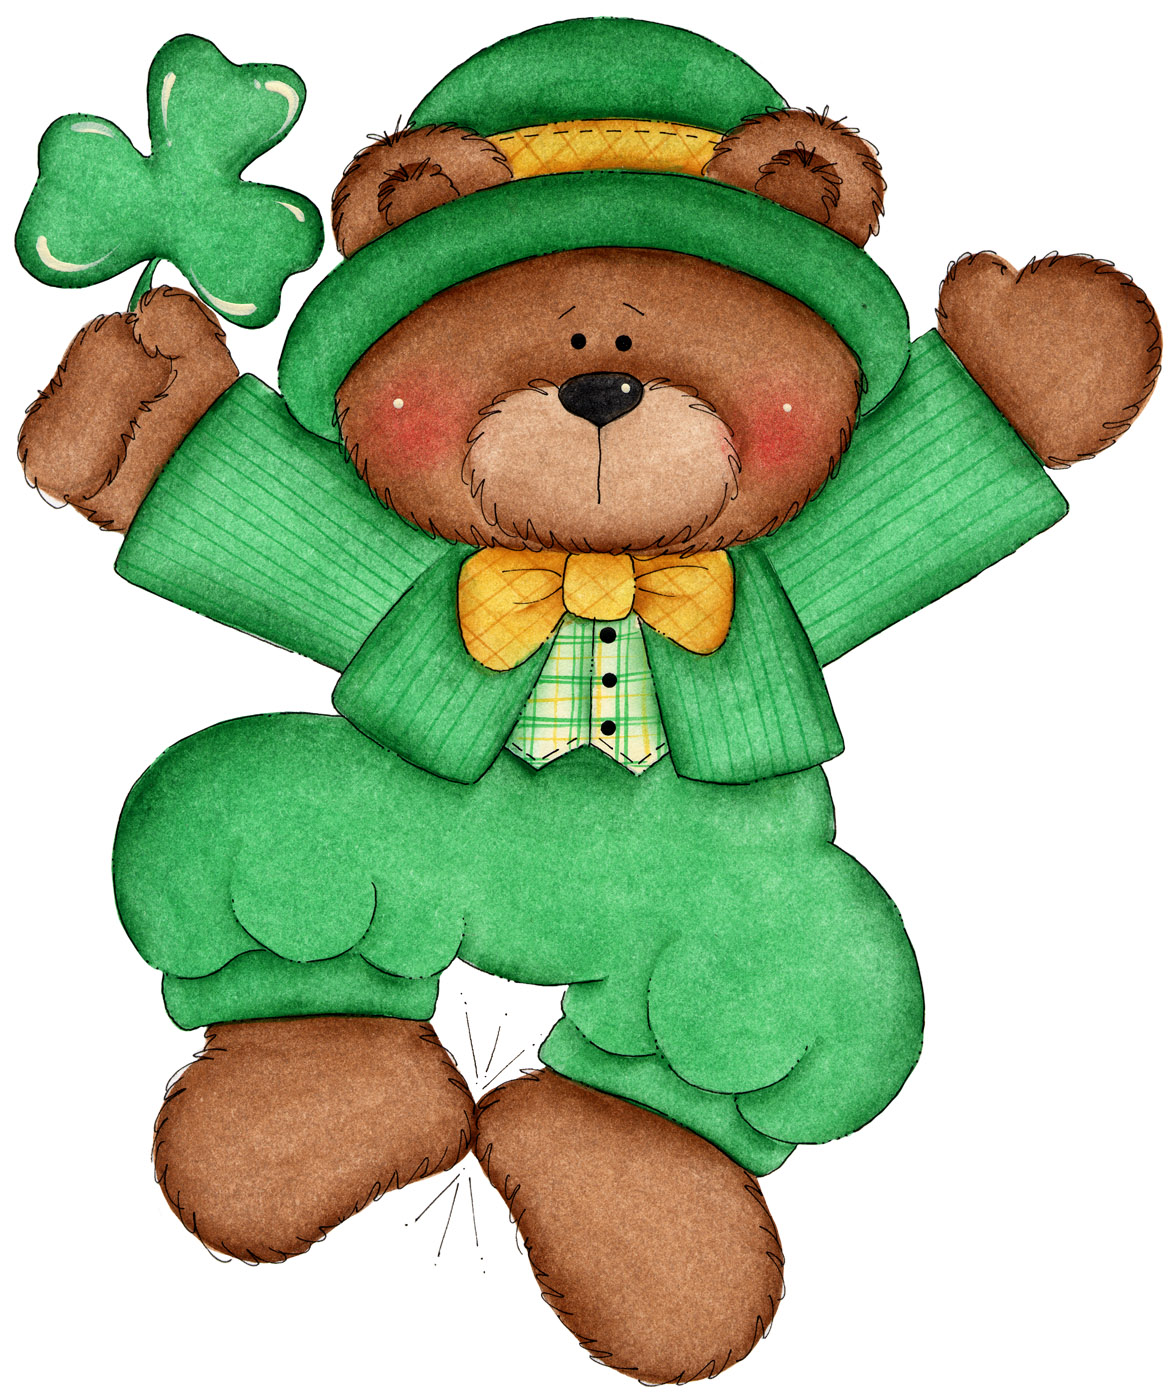 Pictures For St Patricks Day - ClipArt Best